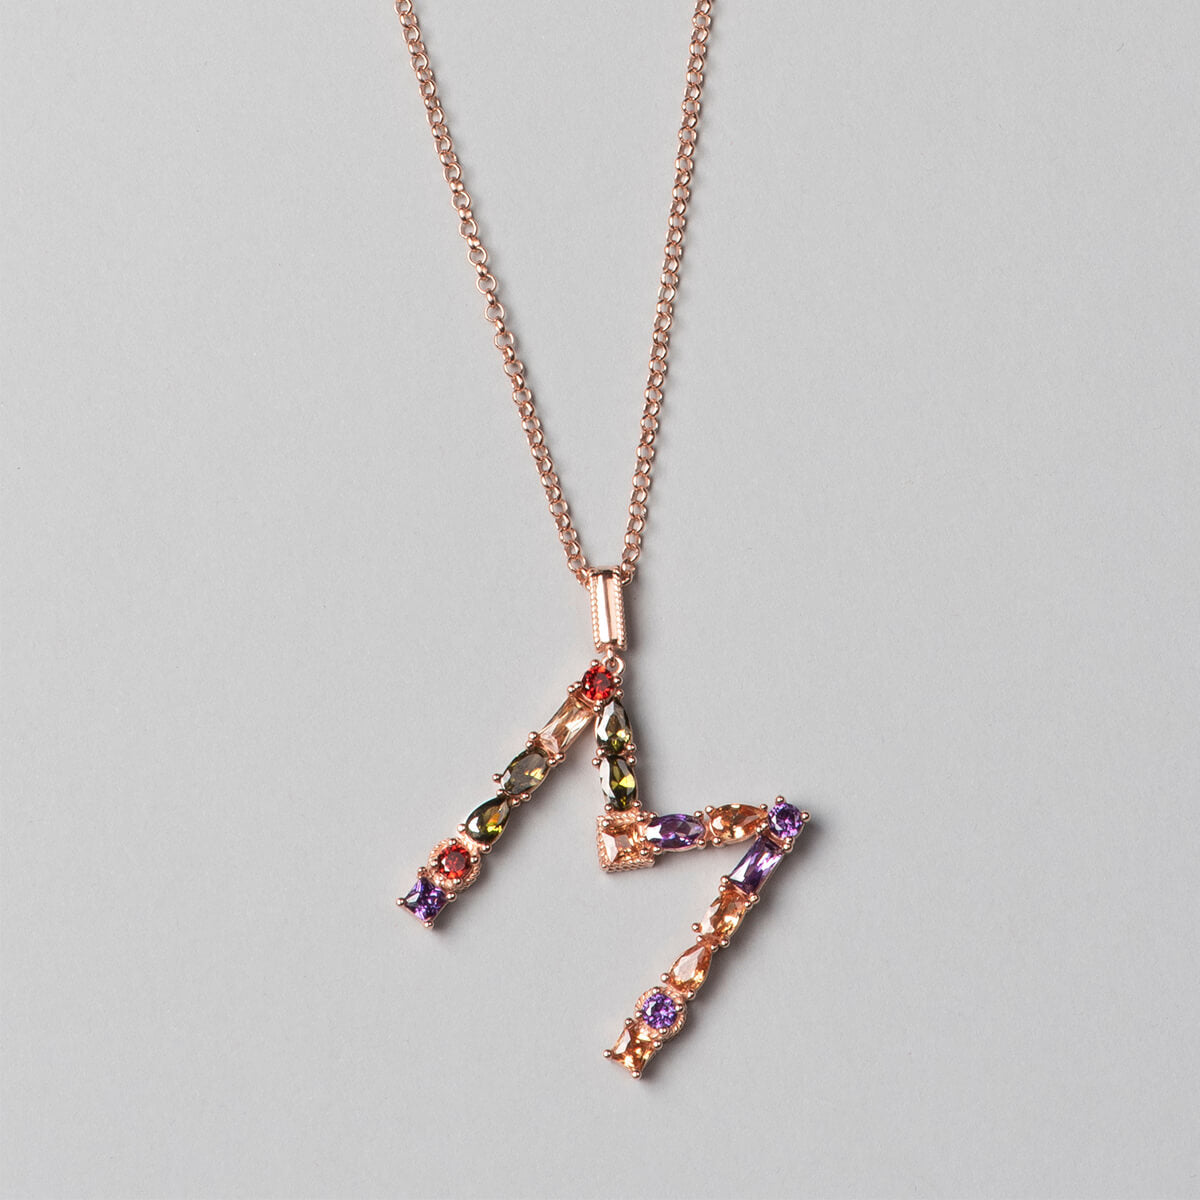 ‘M’ letter pendant necklace. 925 sterling silver, 18K rose gold plated.